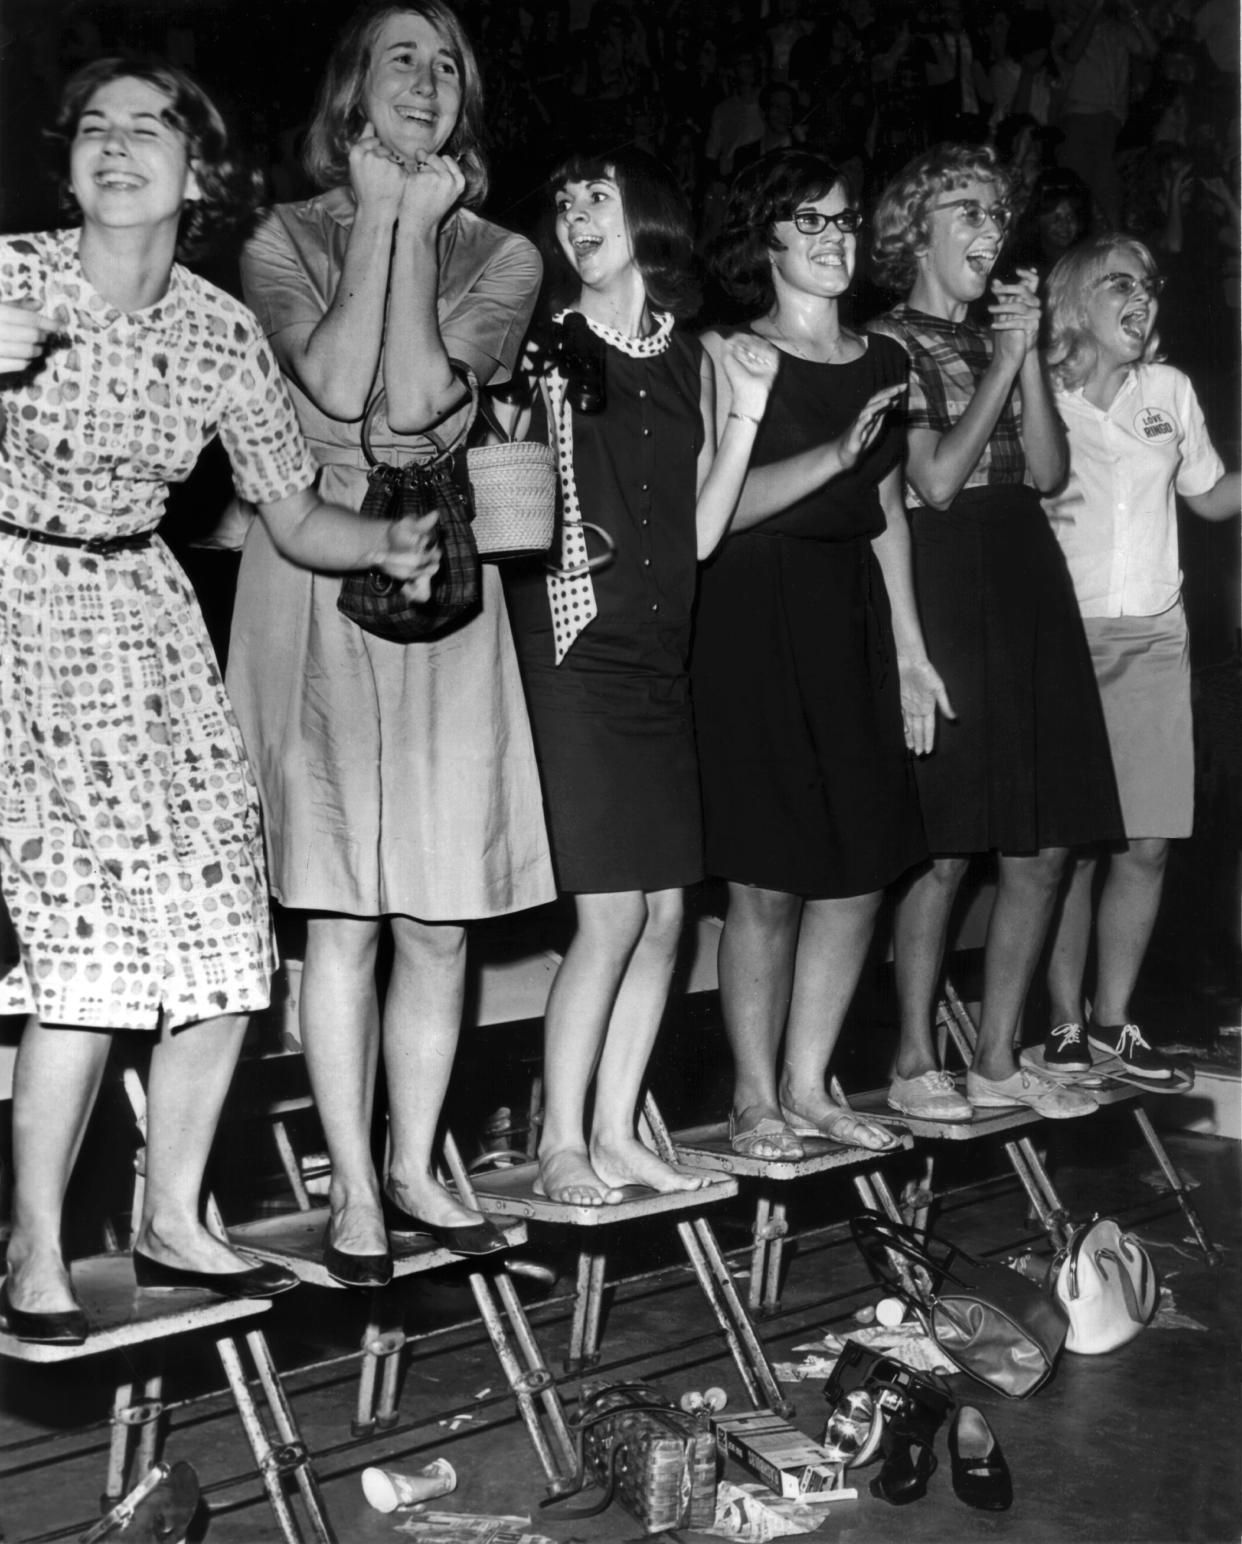 Fans of The Beatles stand on their chairs during the group’s performance at Cincinnati Gardens in August 1964.